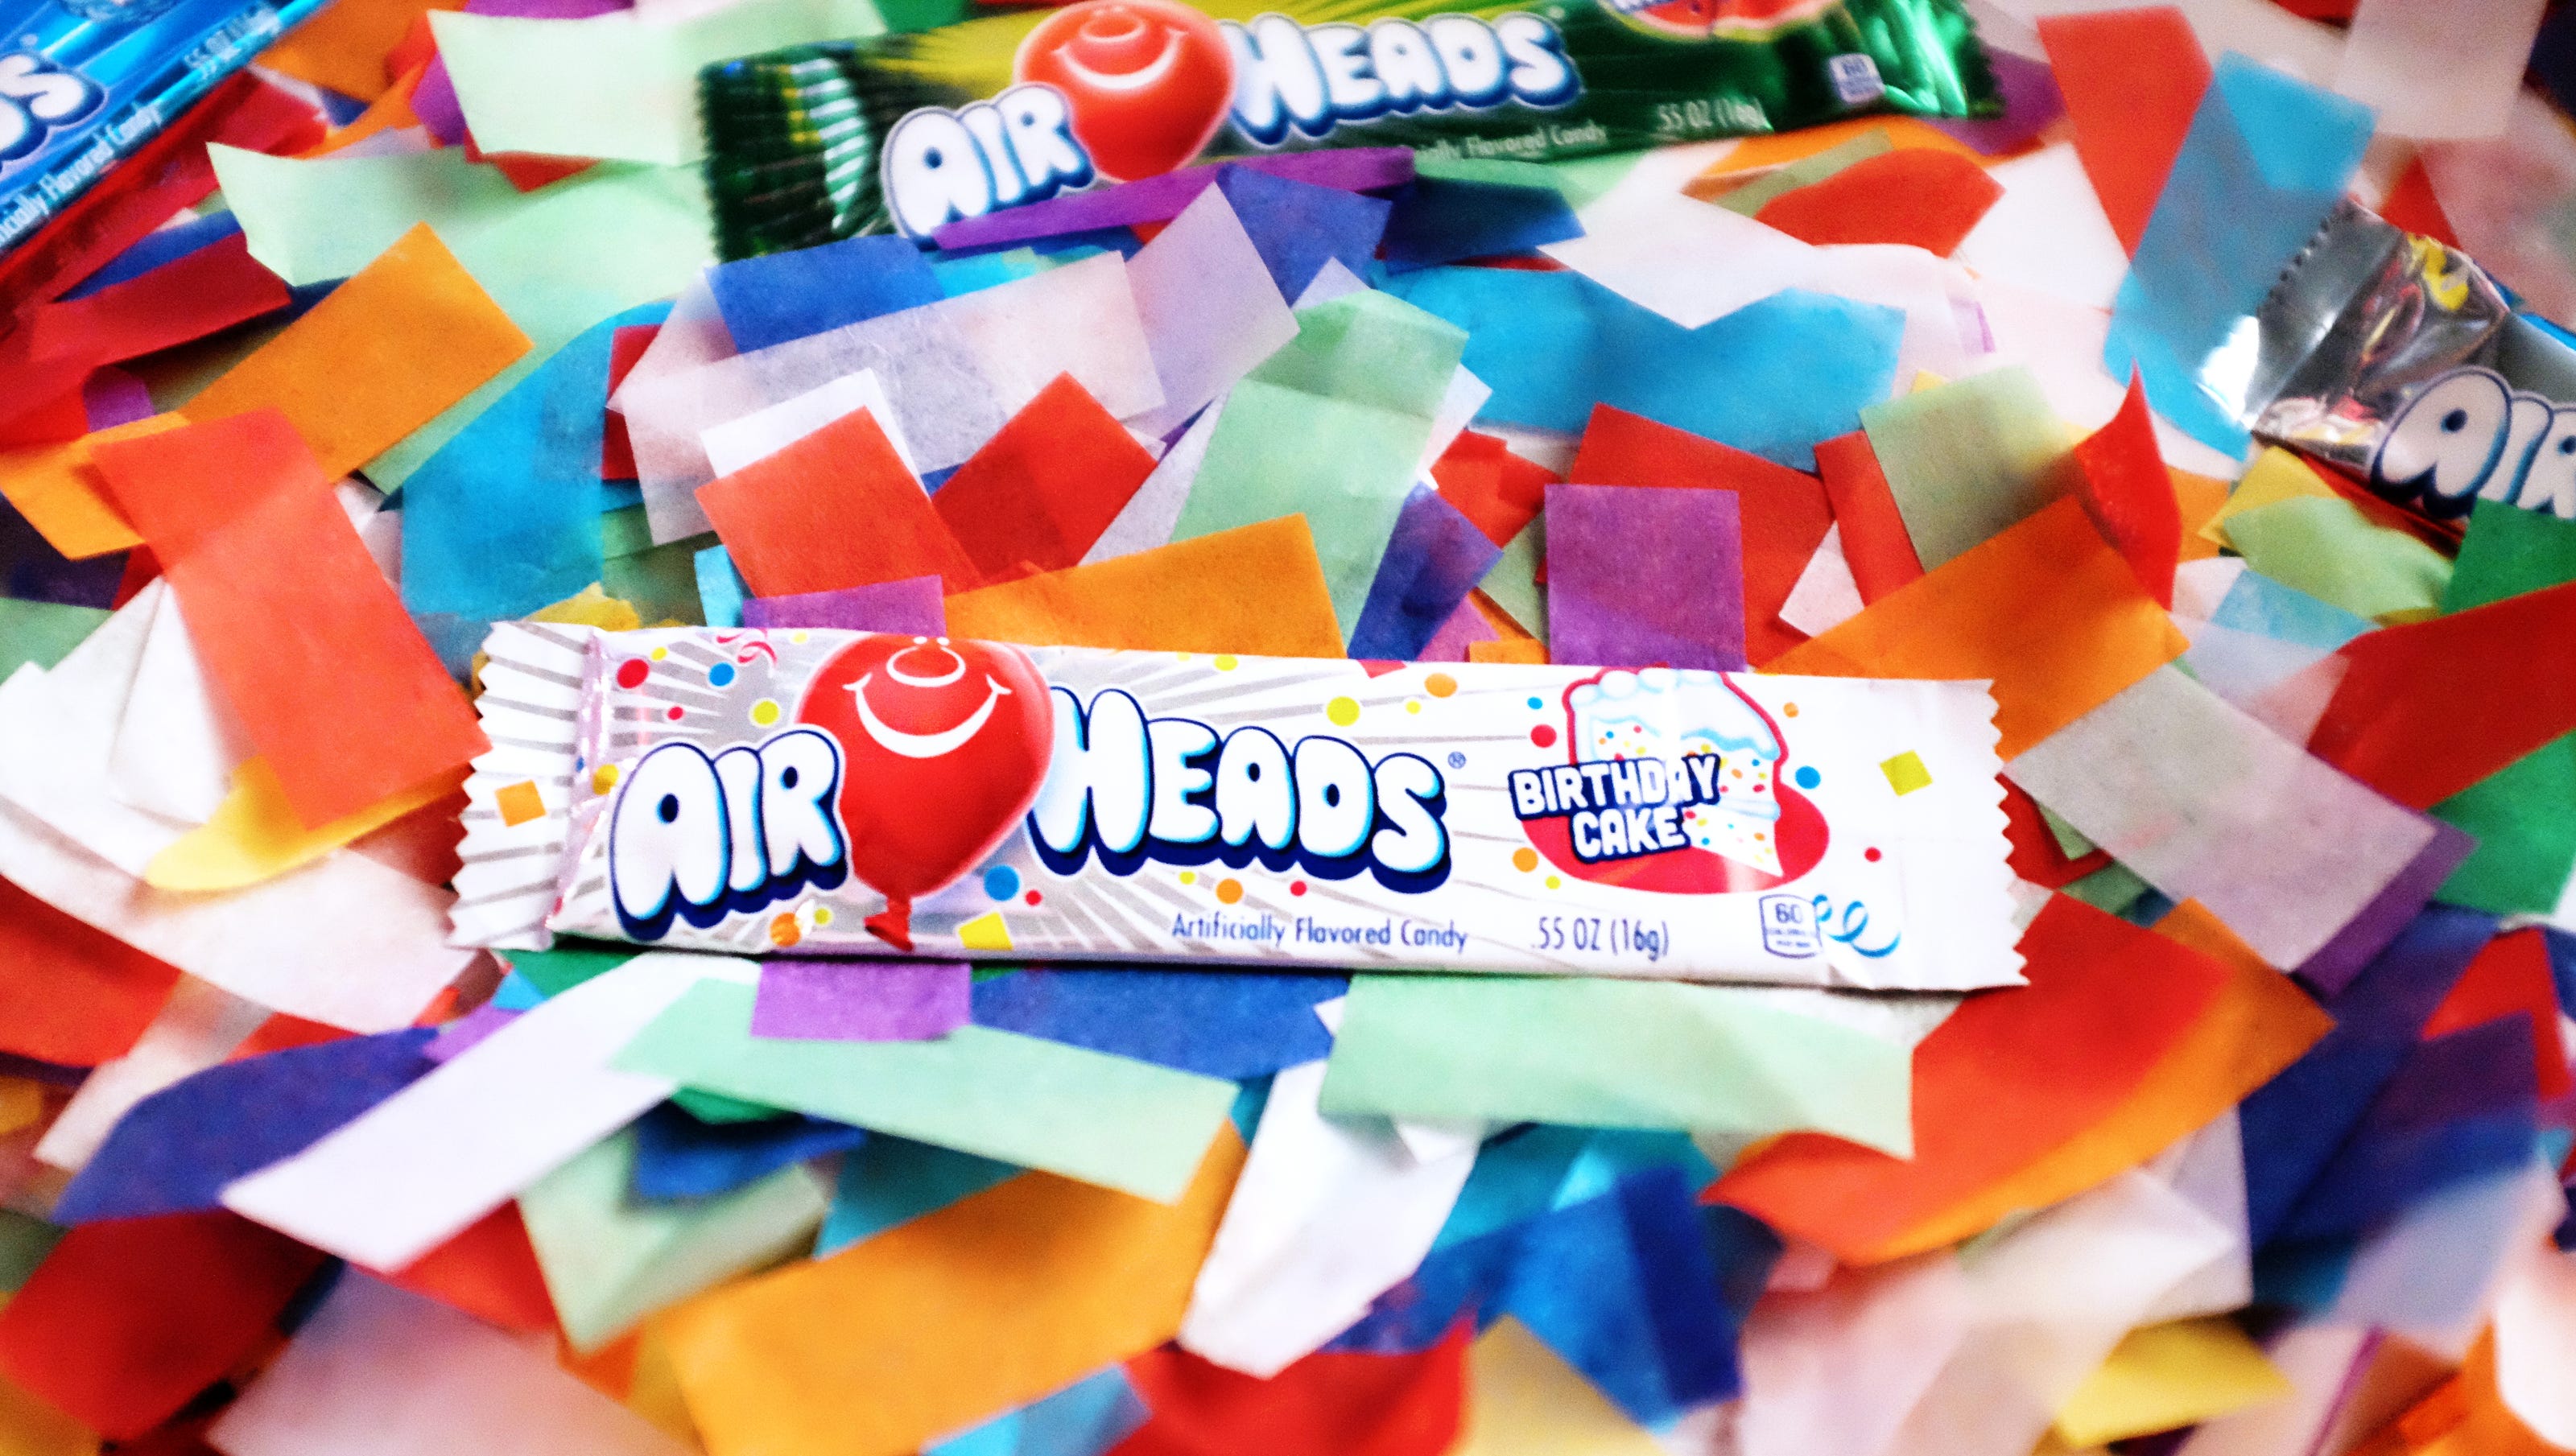 Airheads candy debuts new cake flavor for its birthday